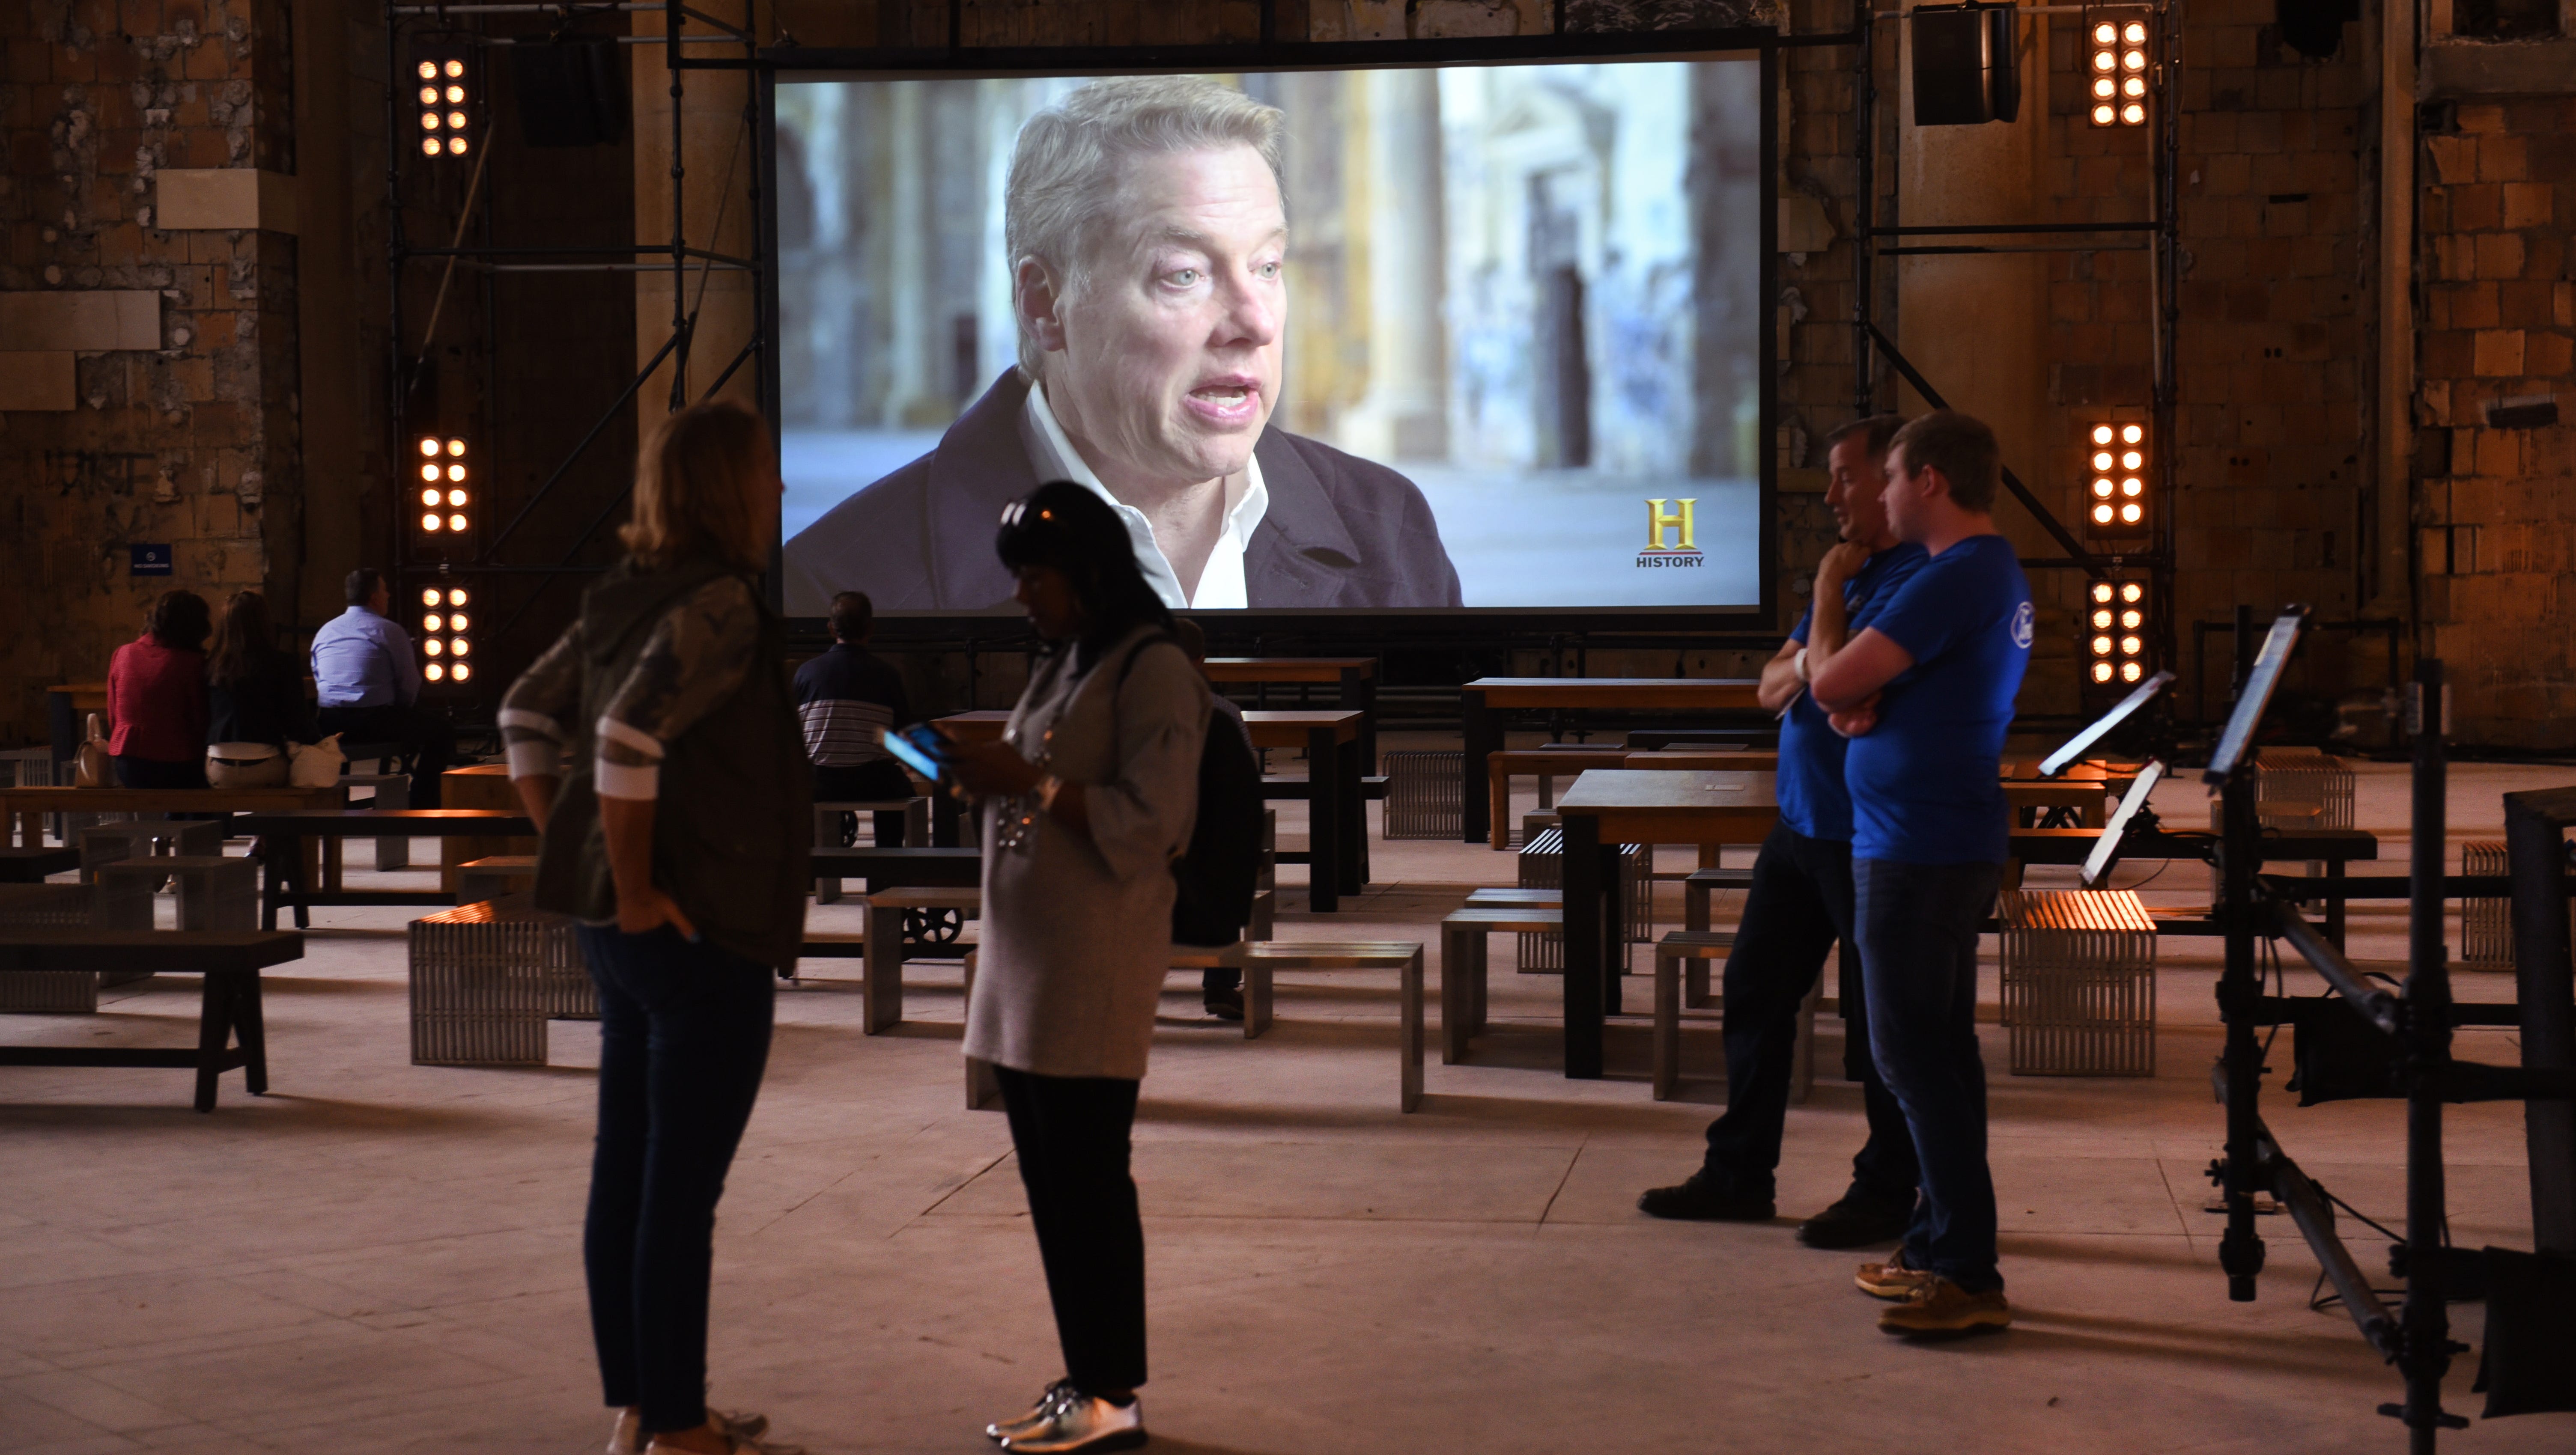 A video of Bill Ford Jr. is viewed in the grand hall of the Michigan Central Train Depot, as Ford Motor Company hosts an open house on Friday in Detroit.